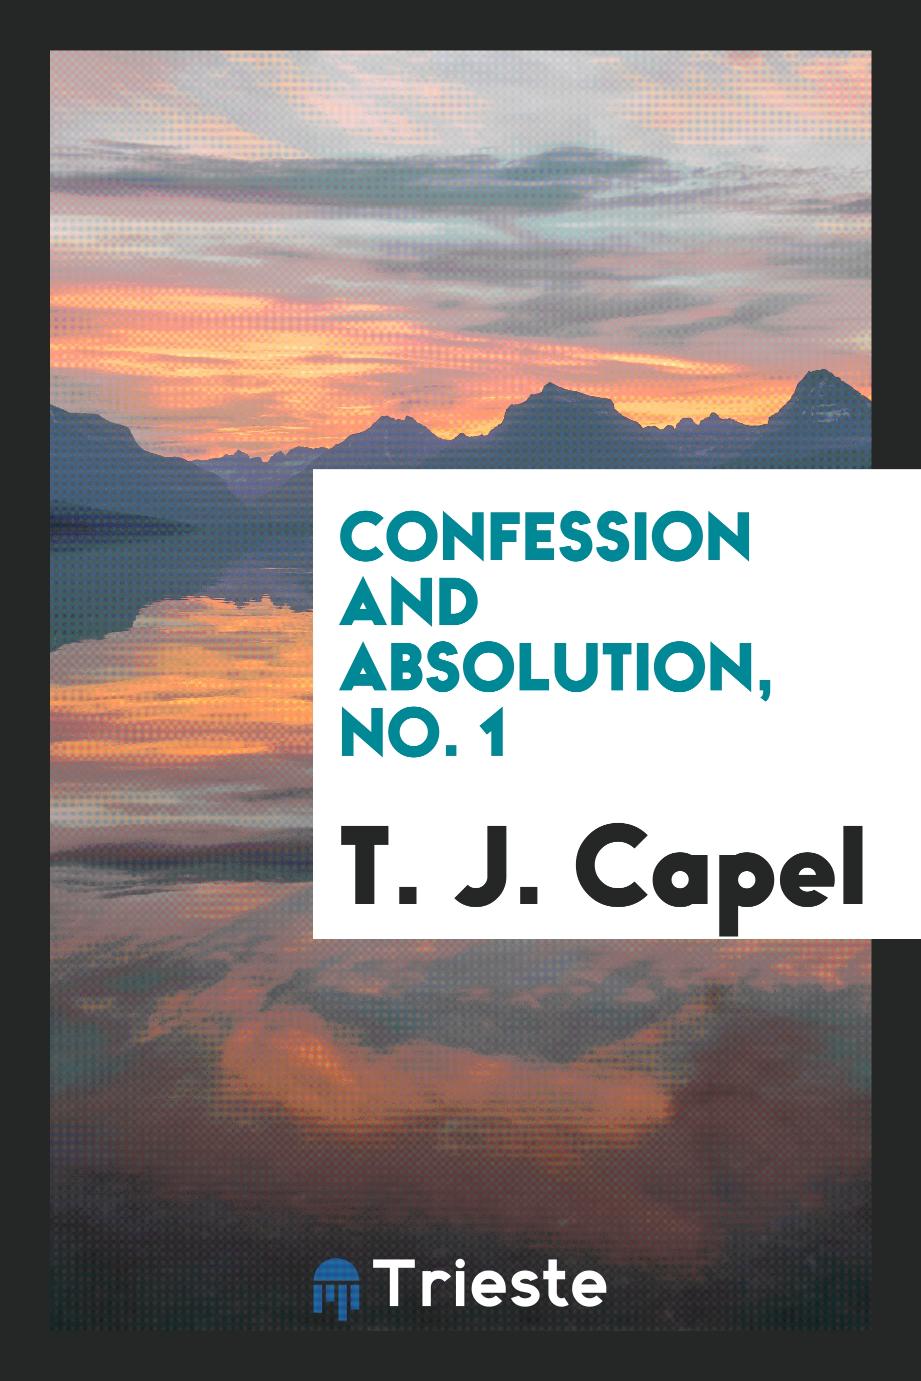 Confession and Absolution, No. 1